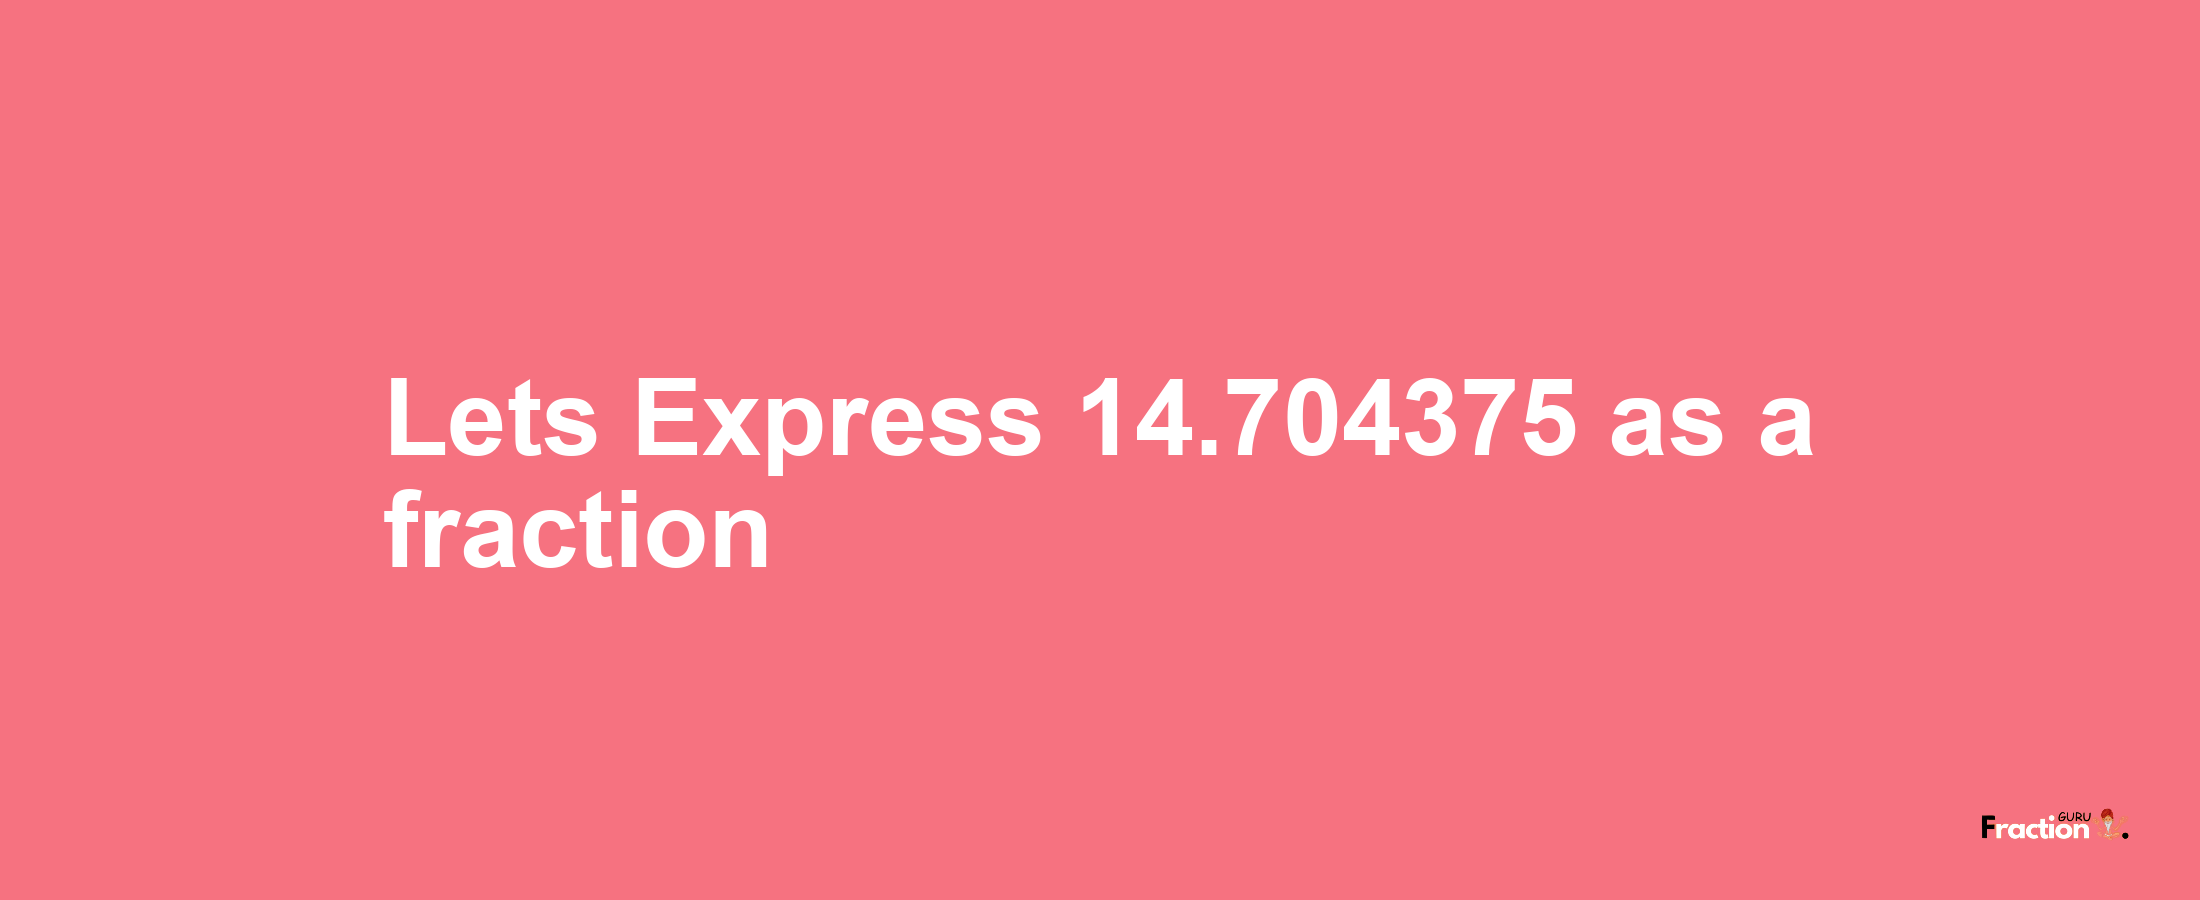 Lets Express 14.704375 as afraction